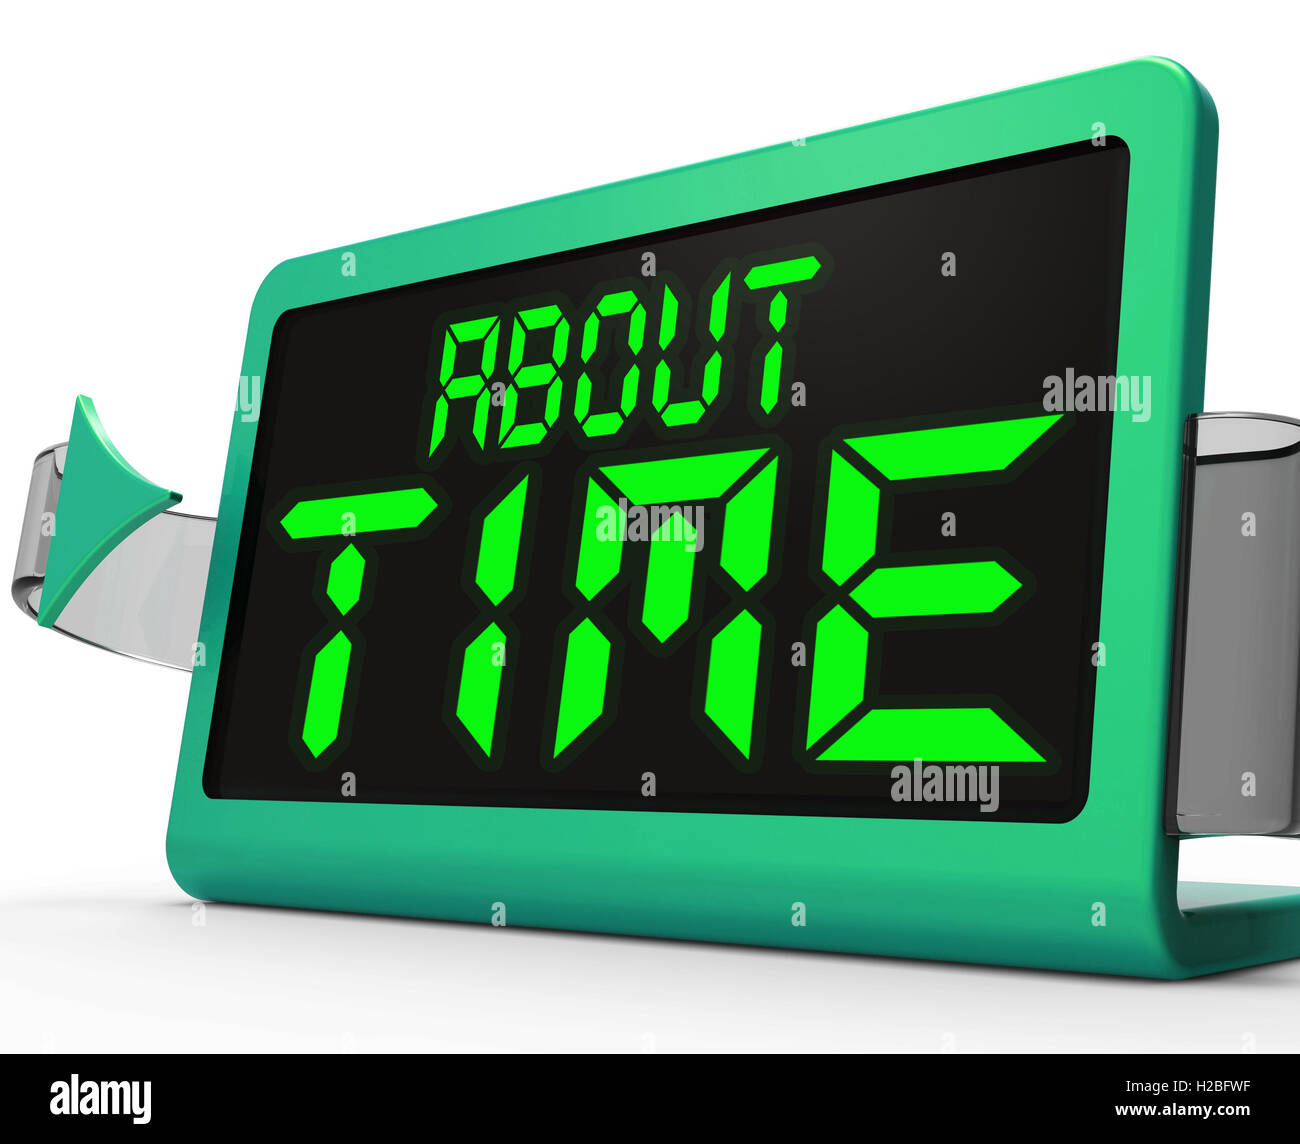 About Time Clock Shows Late Or Overdue Stock Photo